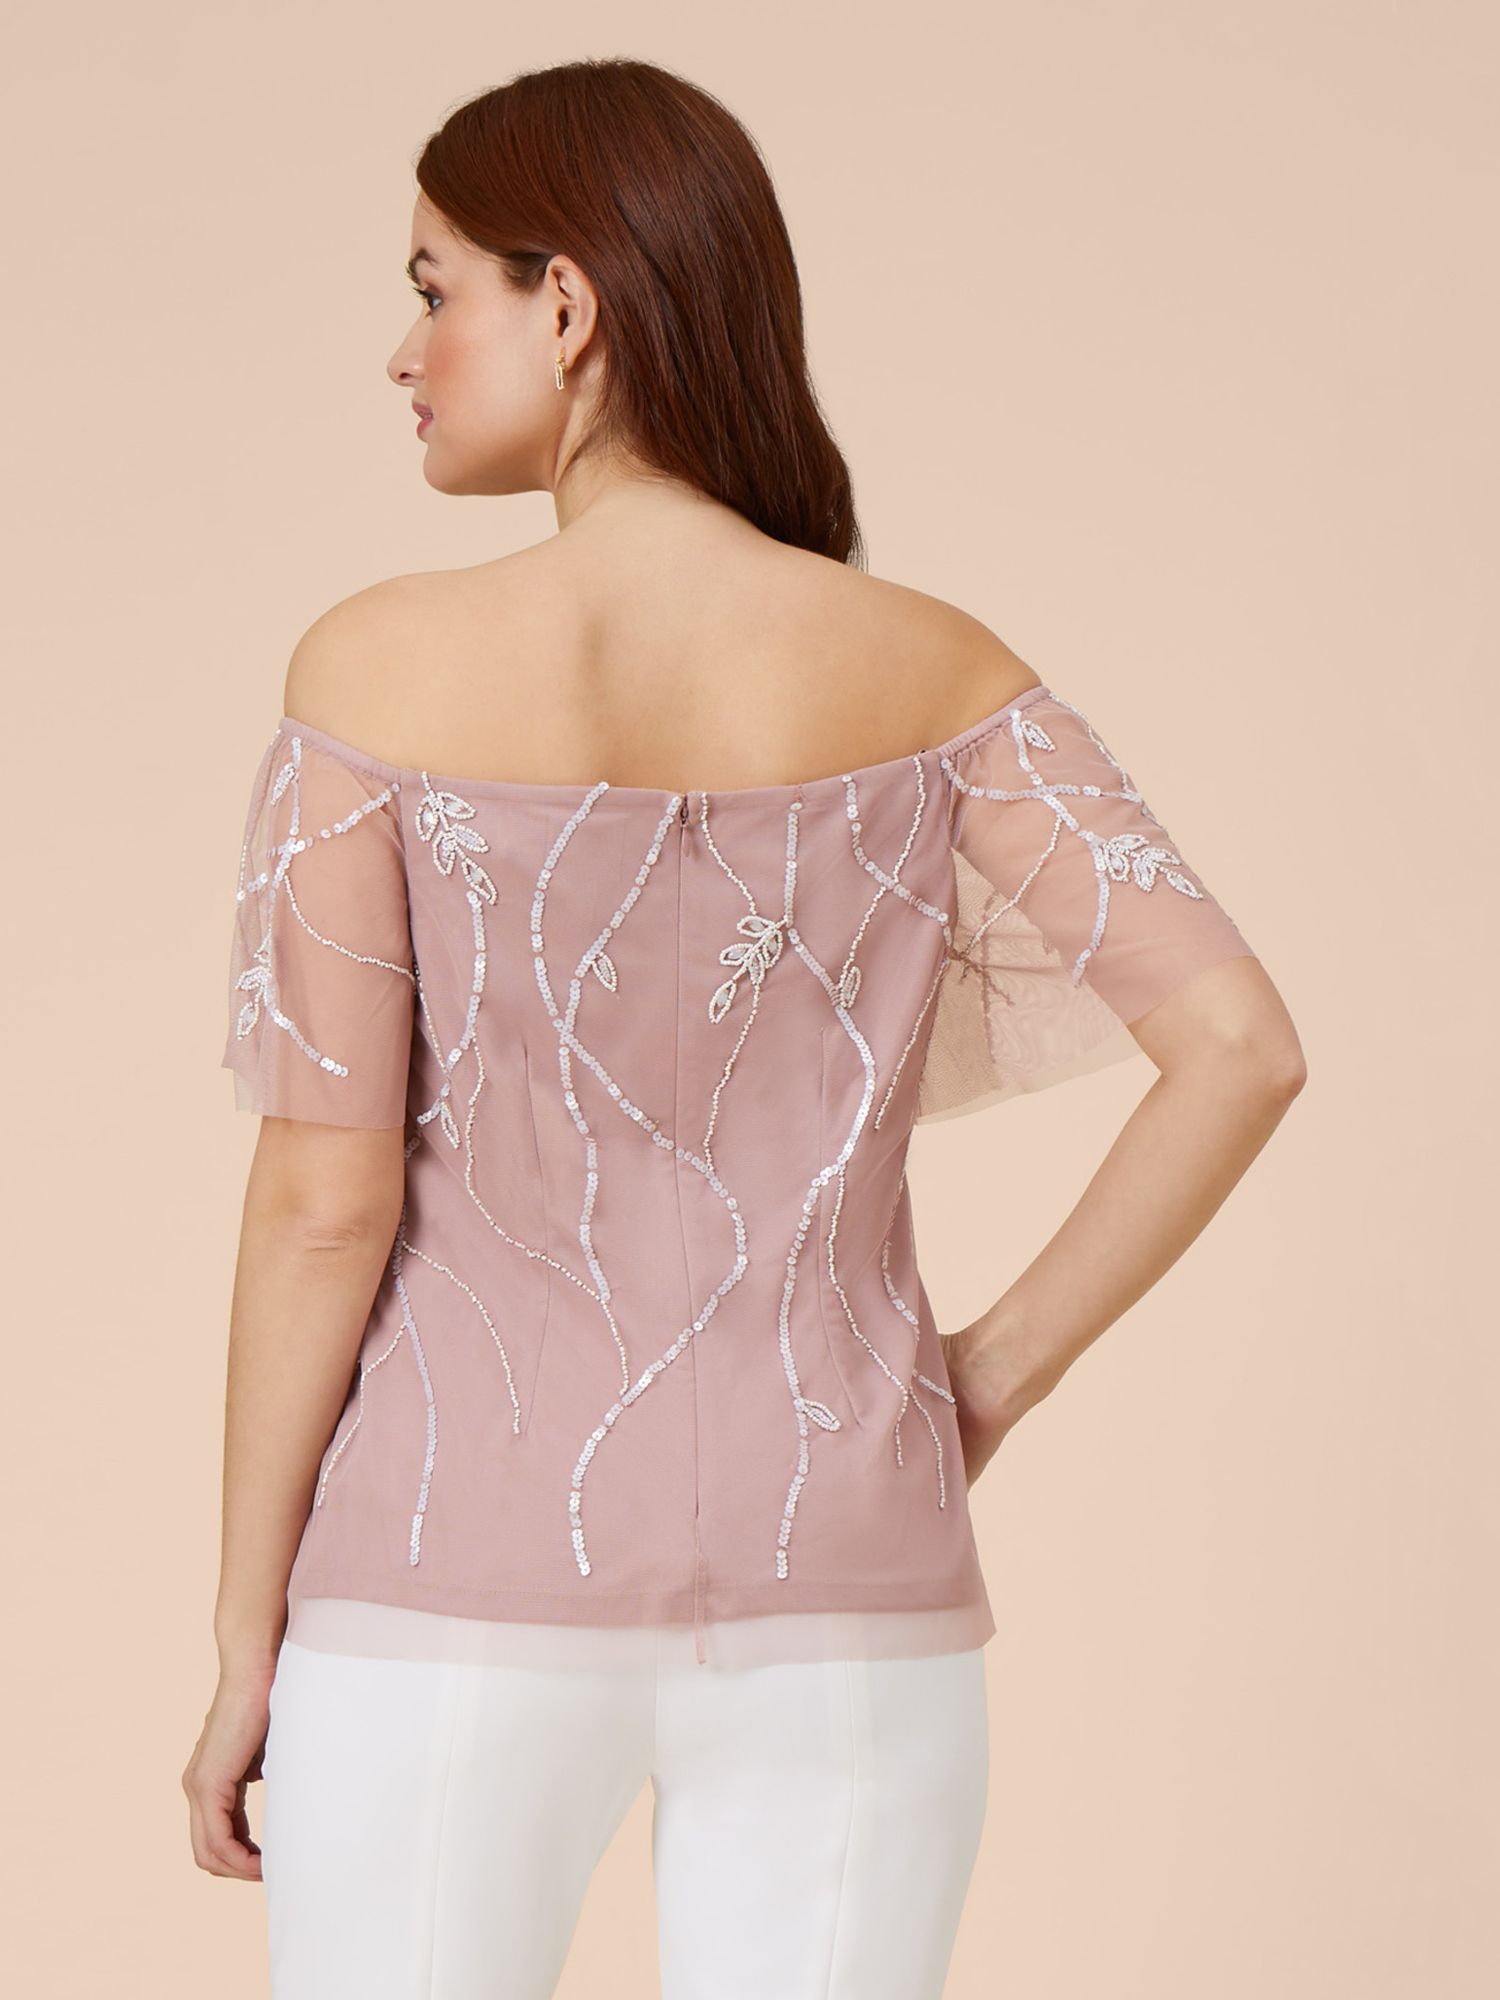 Buy Adrianna Papell Beaded Off Shoulder Top, Light Pink Online at johnlewis.com